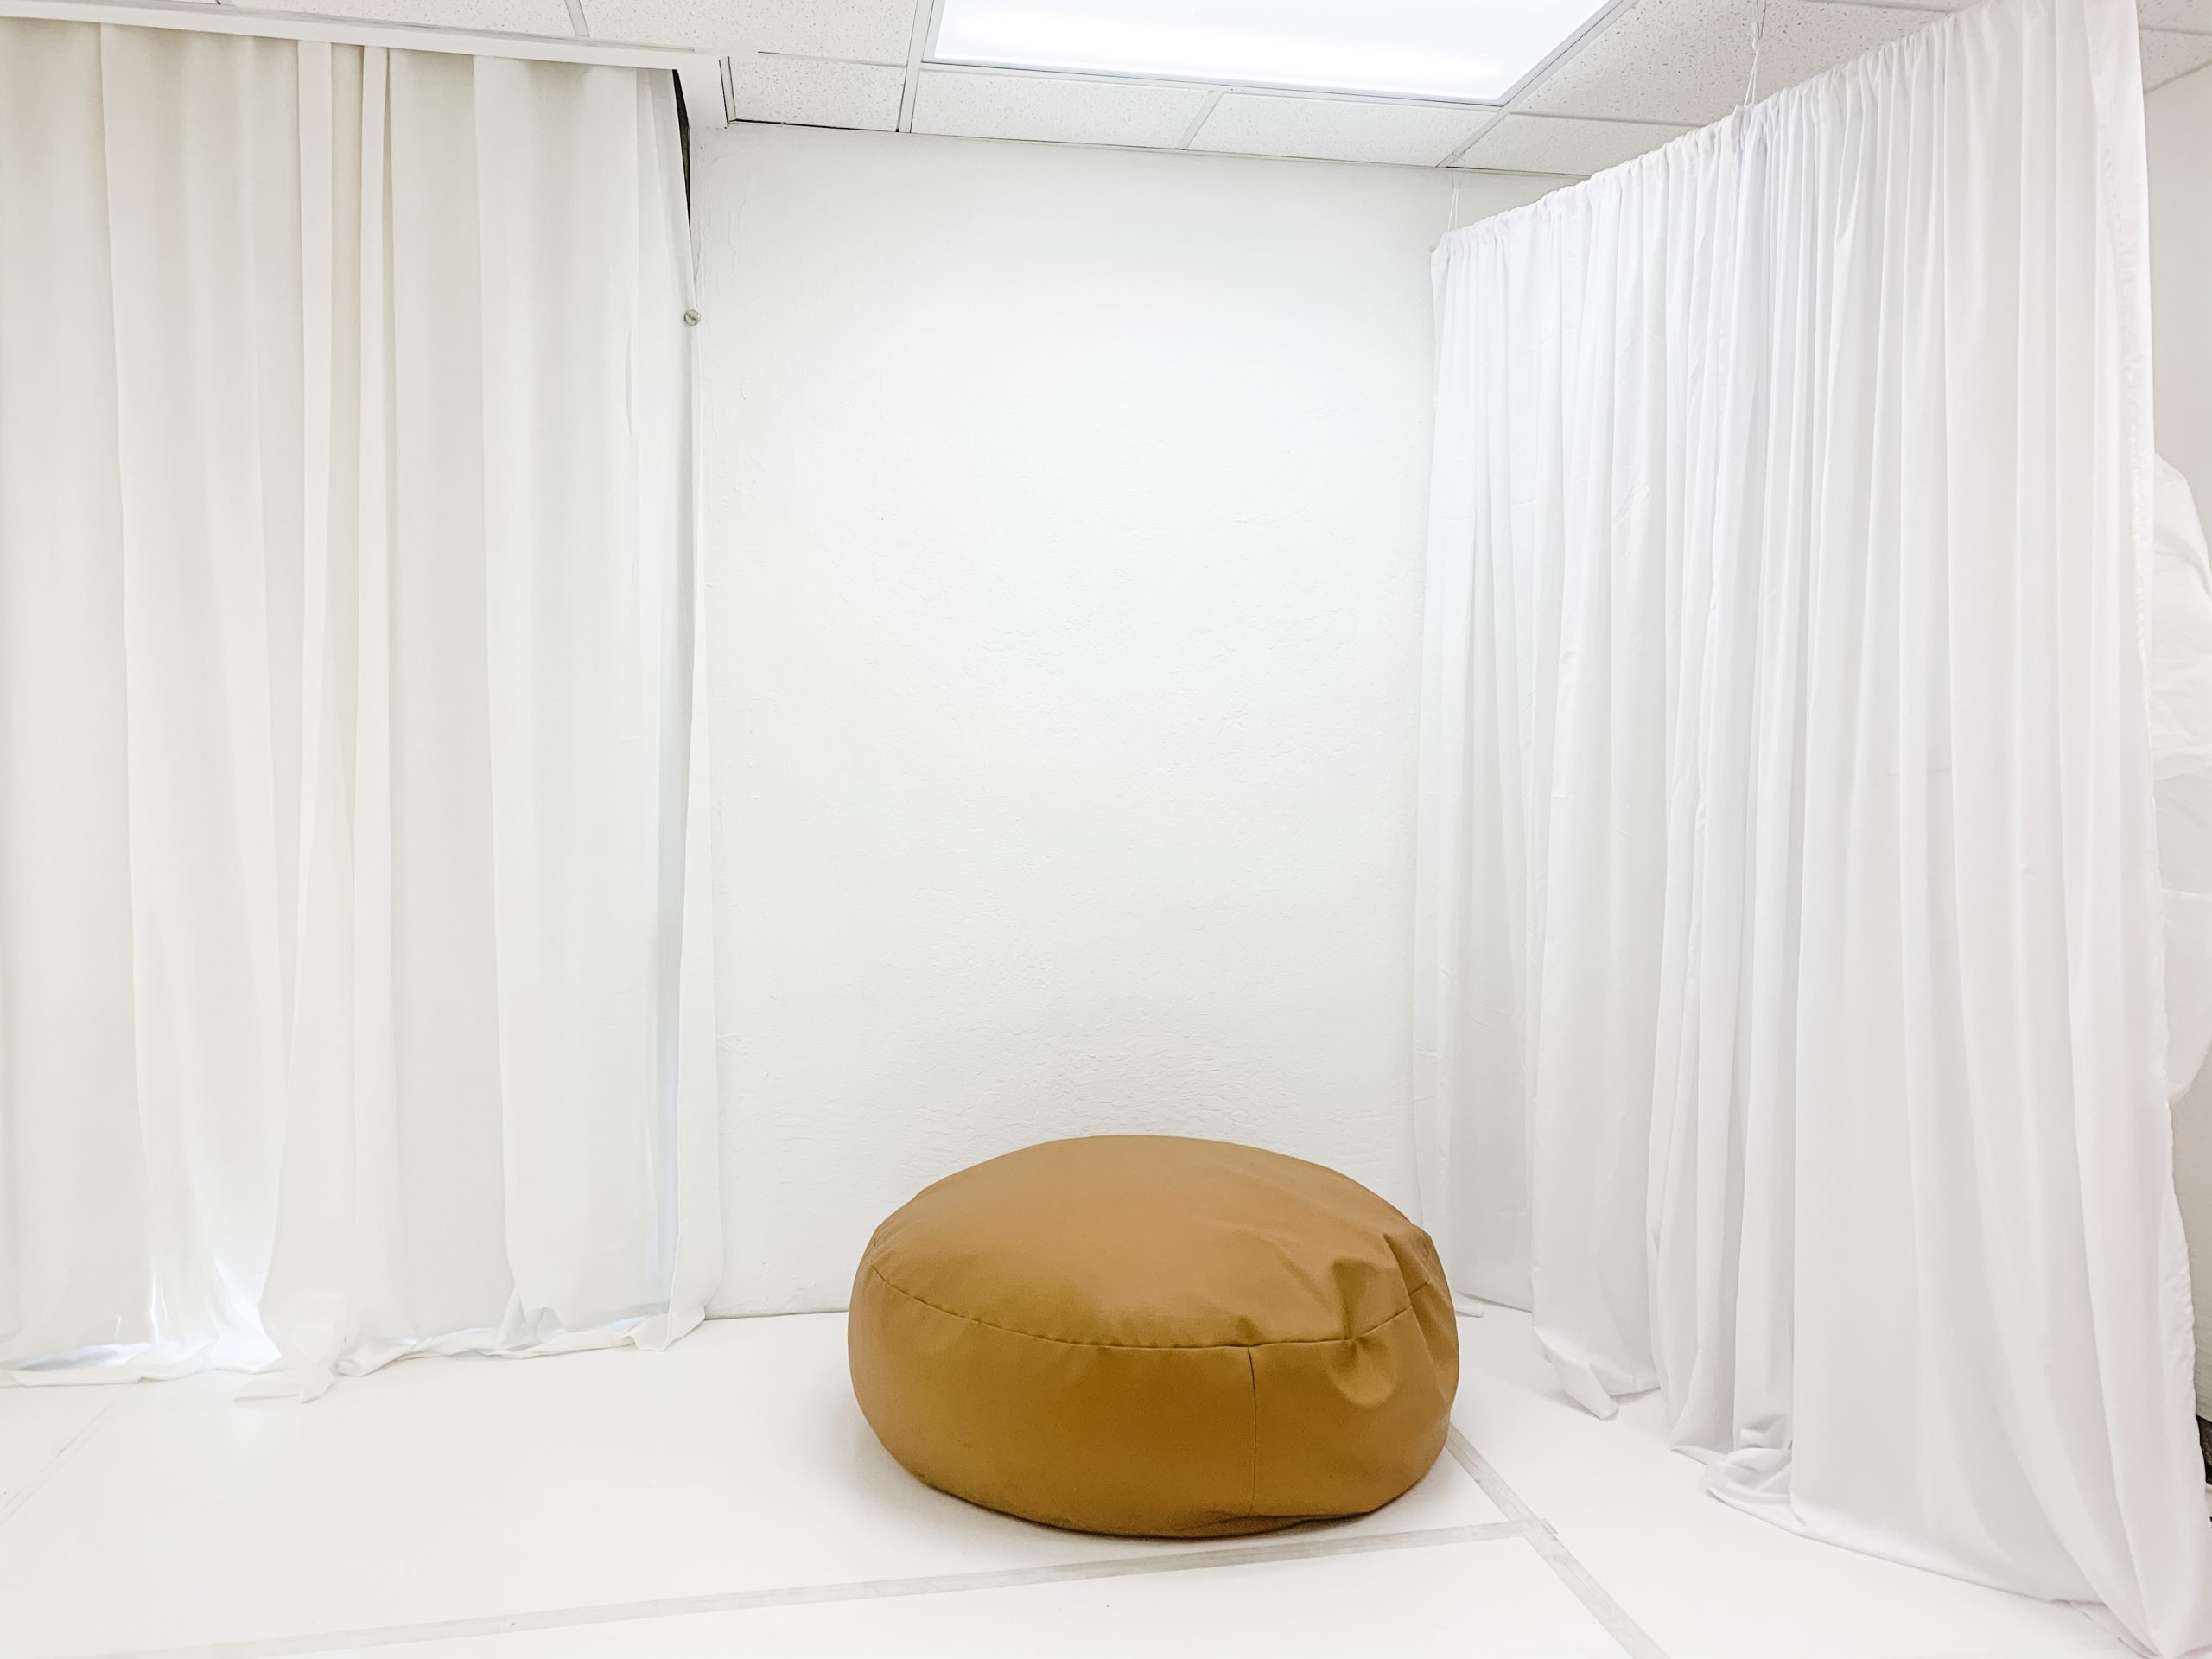 white studio space with newborn bean bag for baby photography sessions